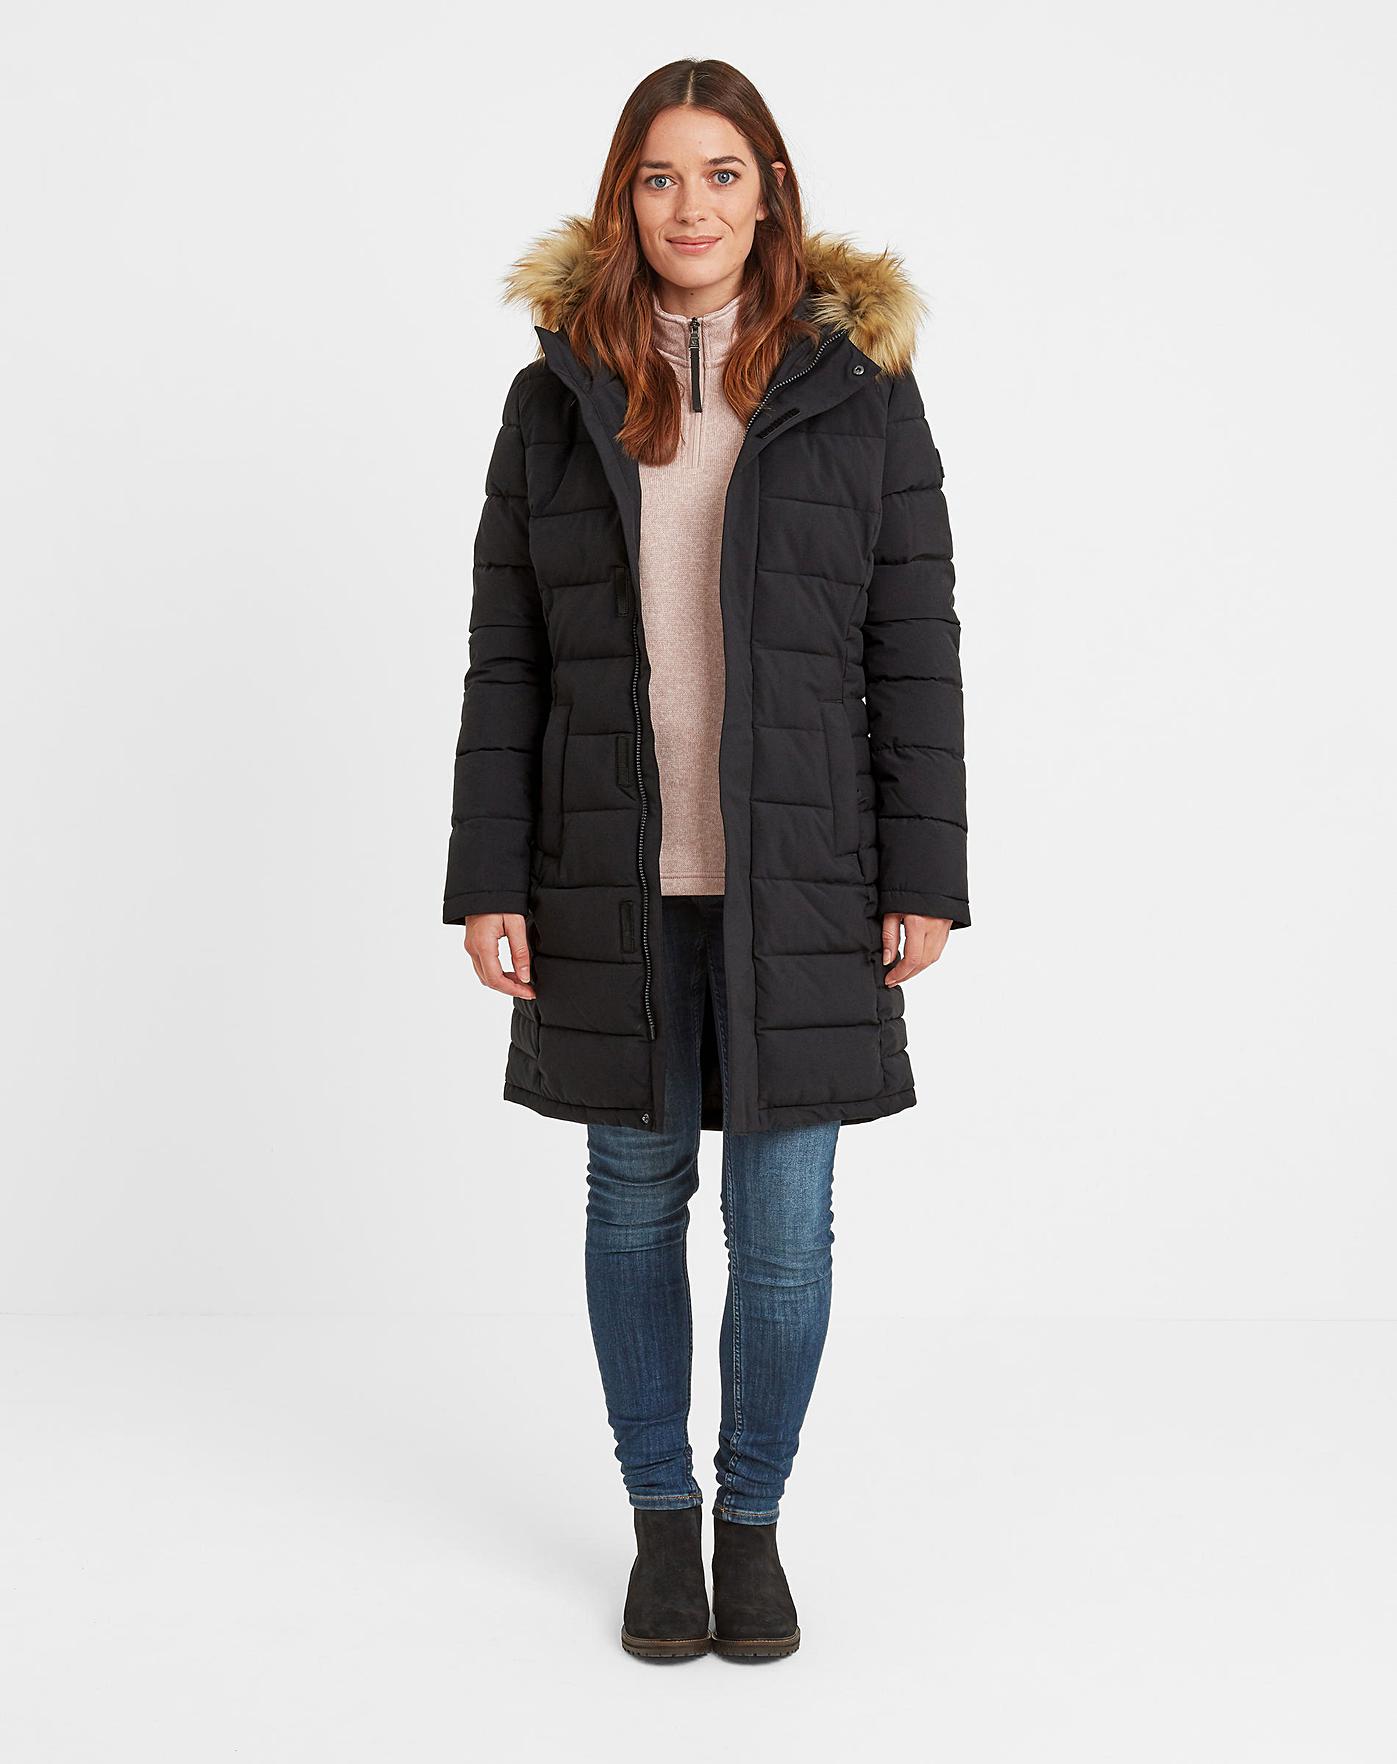 TOG 24 Firbeck Womens Ultra Warm Wind Resistant Long Padded Winter Coat with Pockets and Faux Fur Trim Hood